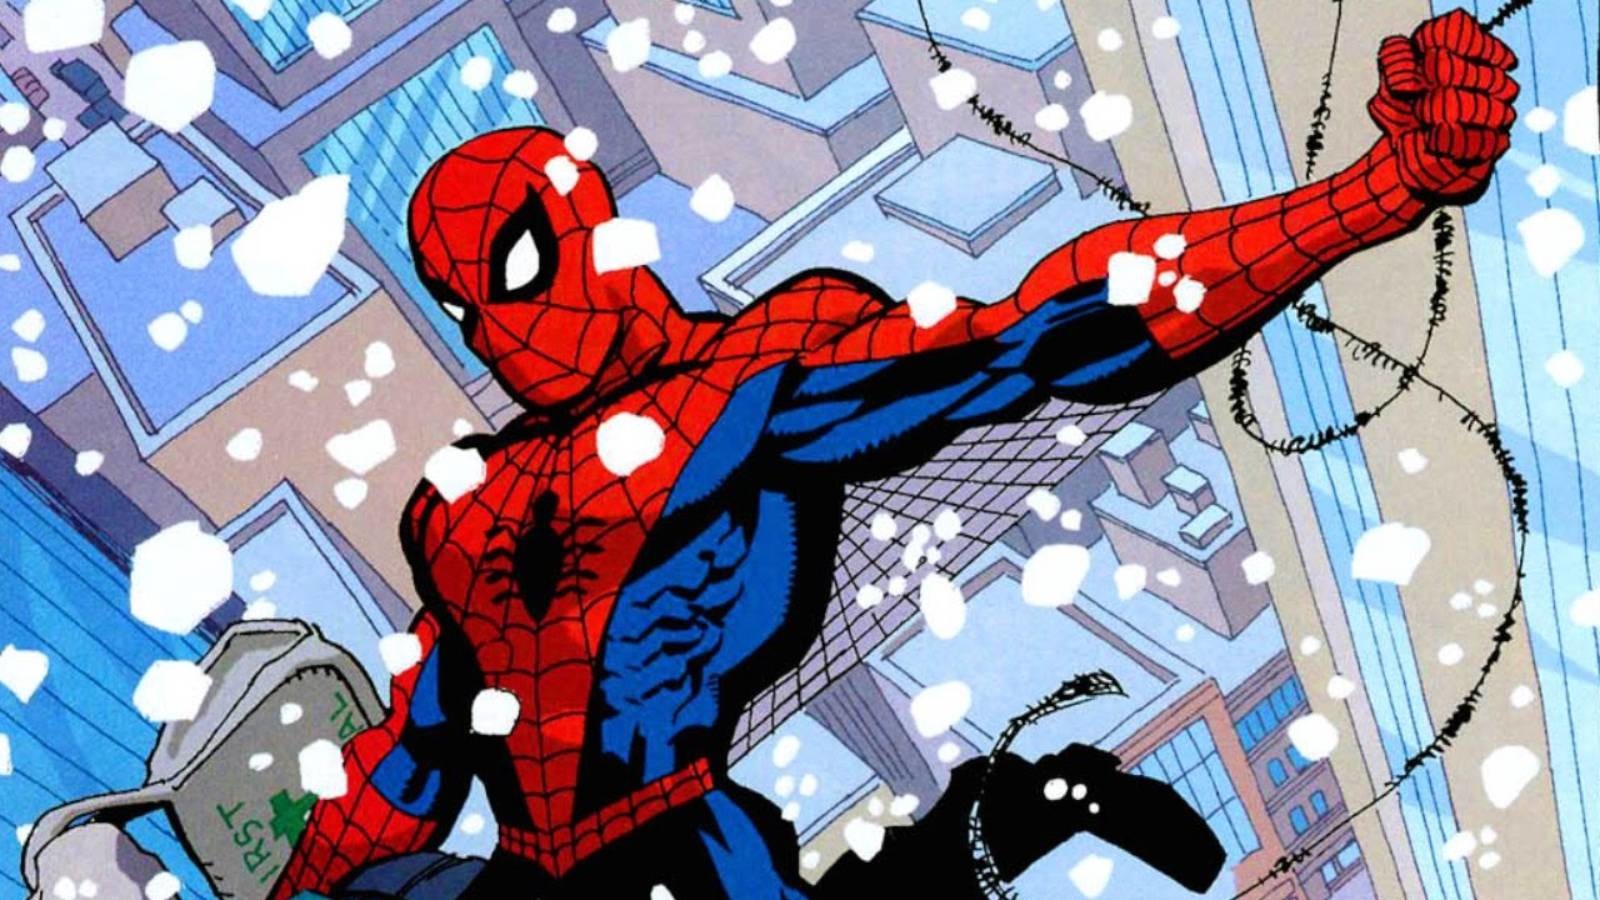 Marvel Comics Just Gave Spider-Man An Awesome New Costume